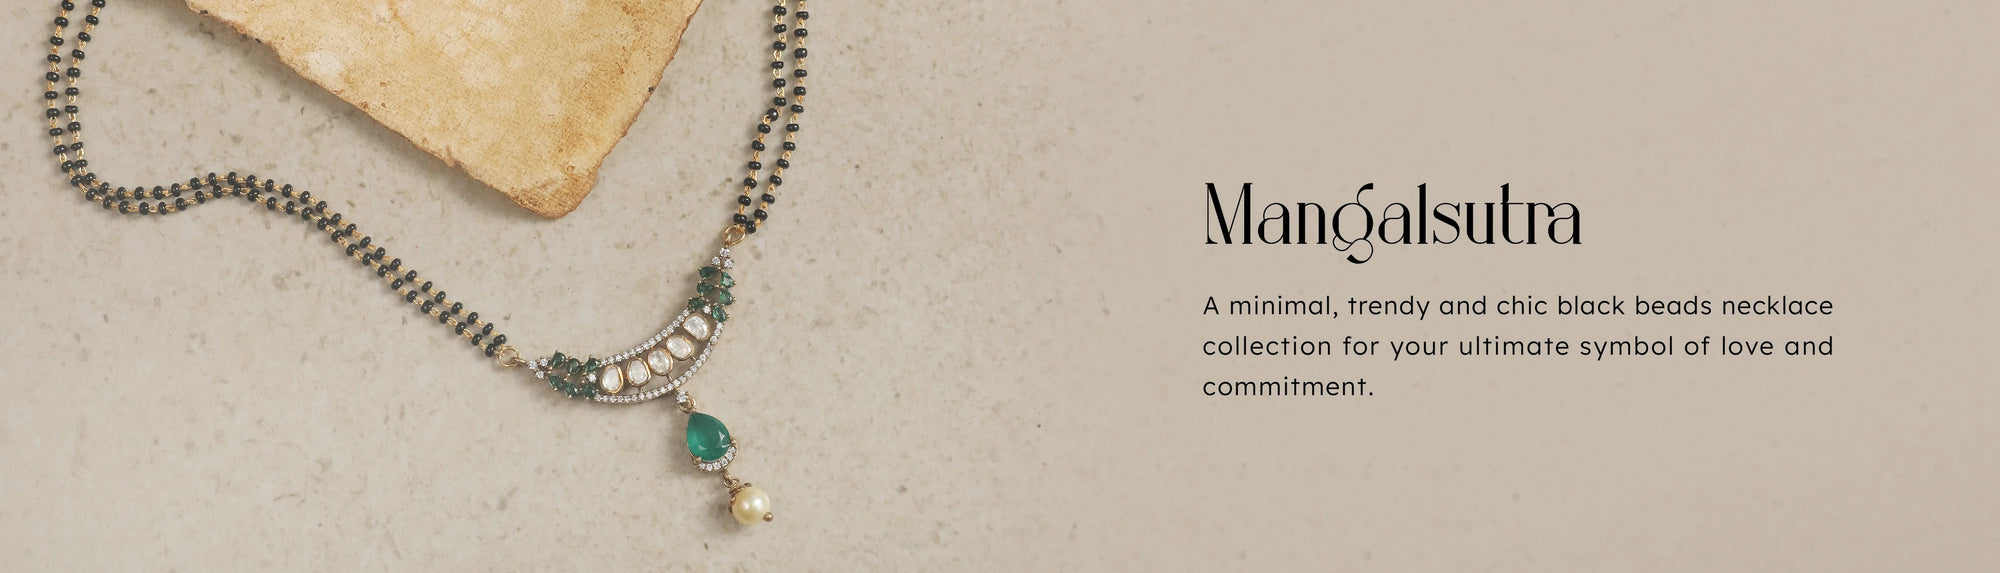 Mangalsutra Collection - Necklaces